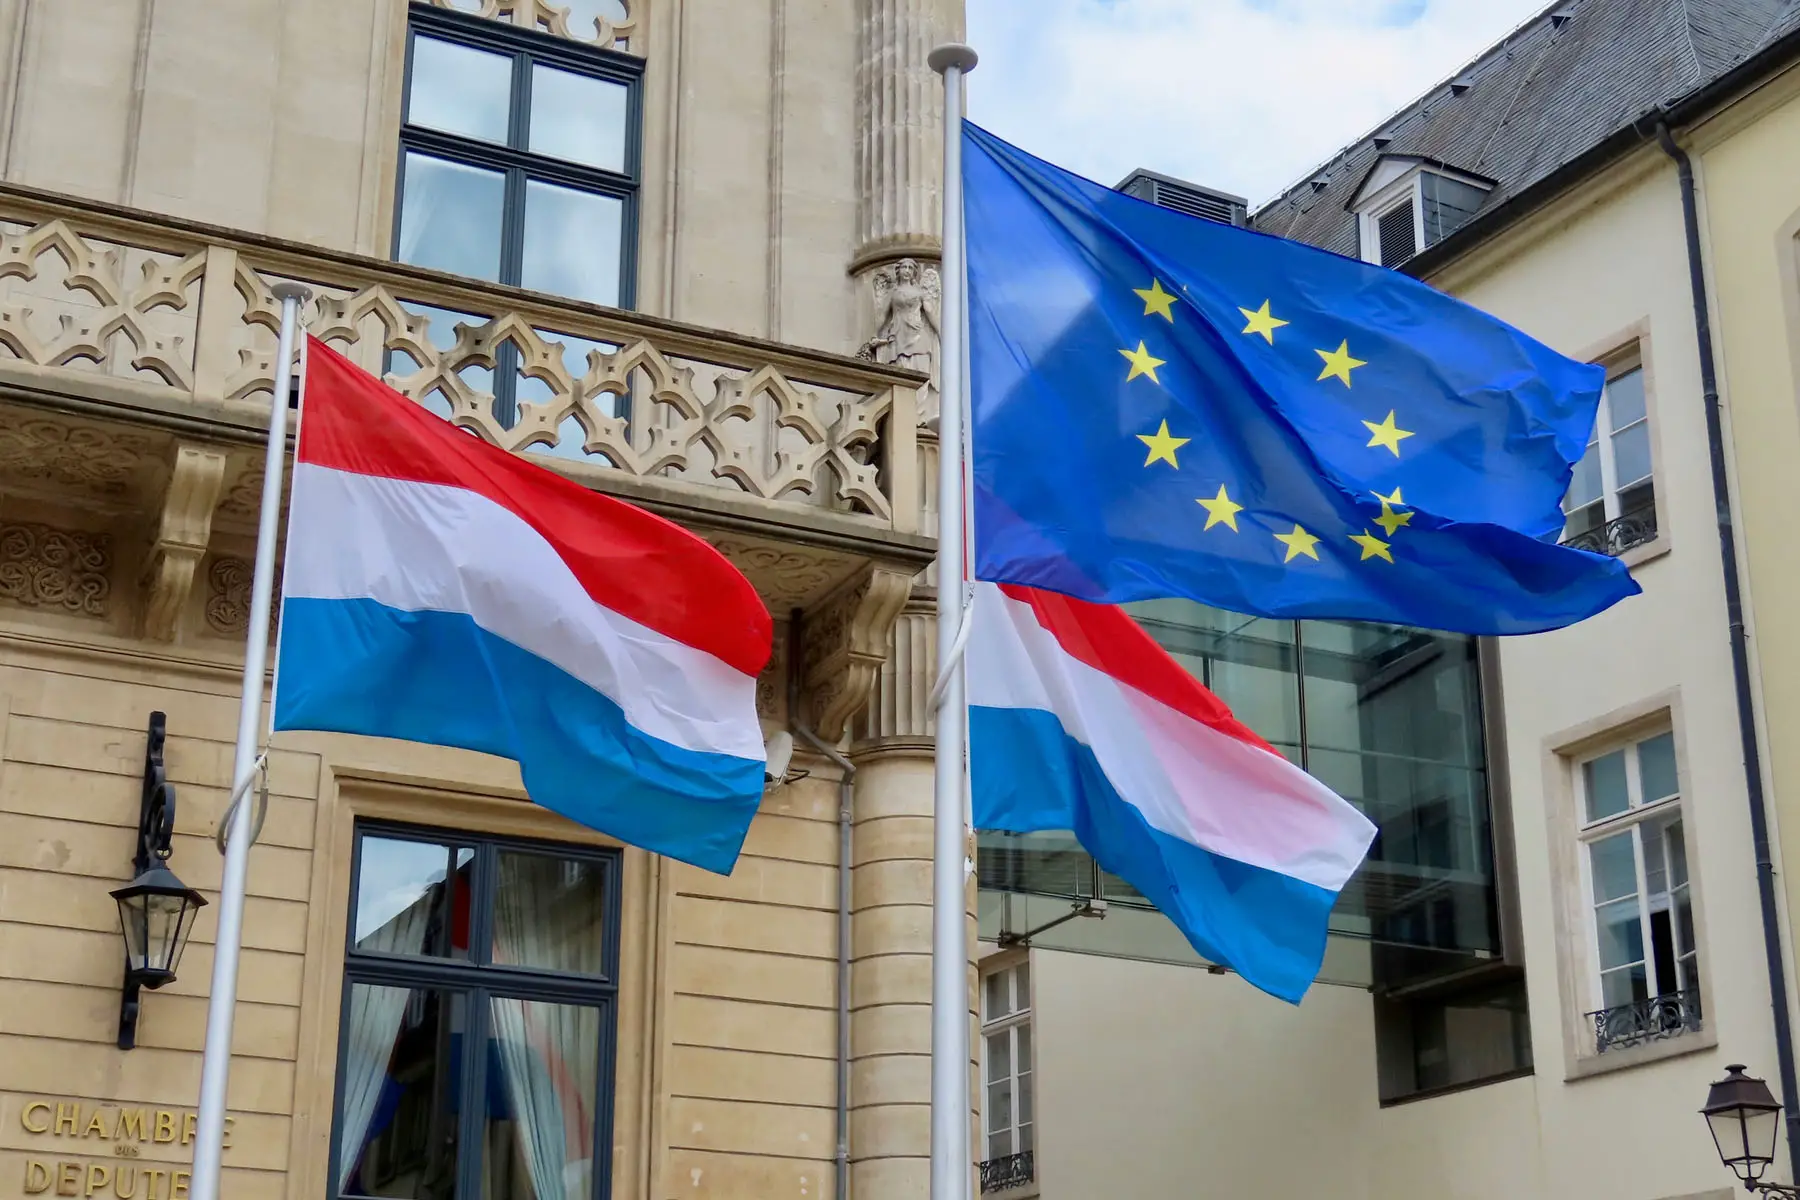 EU and Luxembourg flags fly at full mast at the Chamber of Deputies  